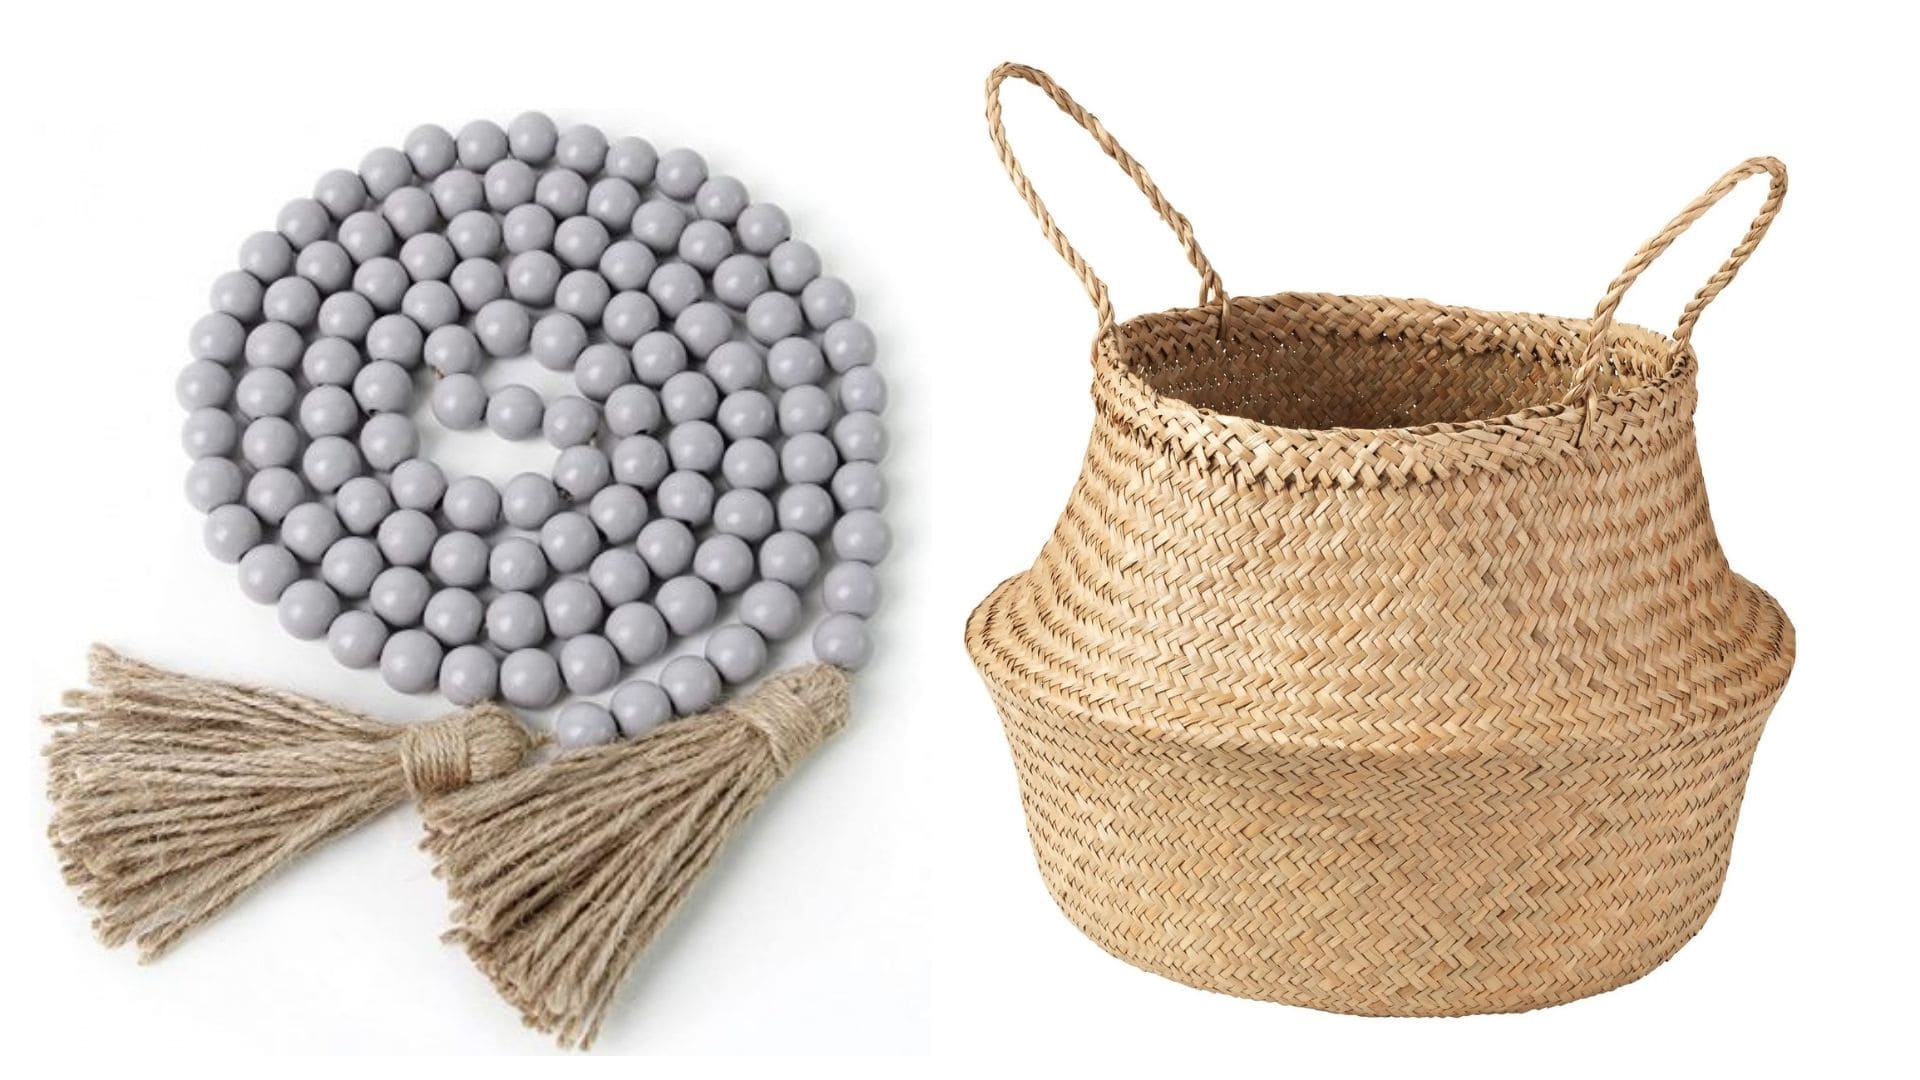 On the left is a string of grey beads with hessian tassels and on the right is a sea-grass basket.